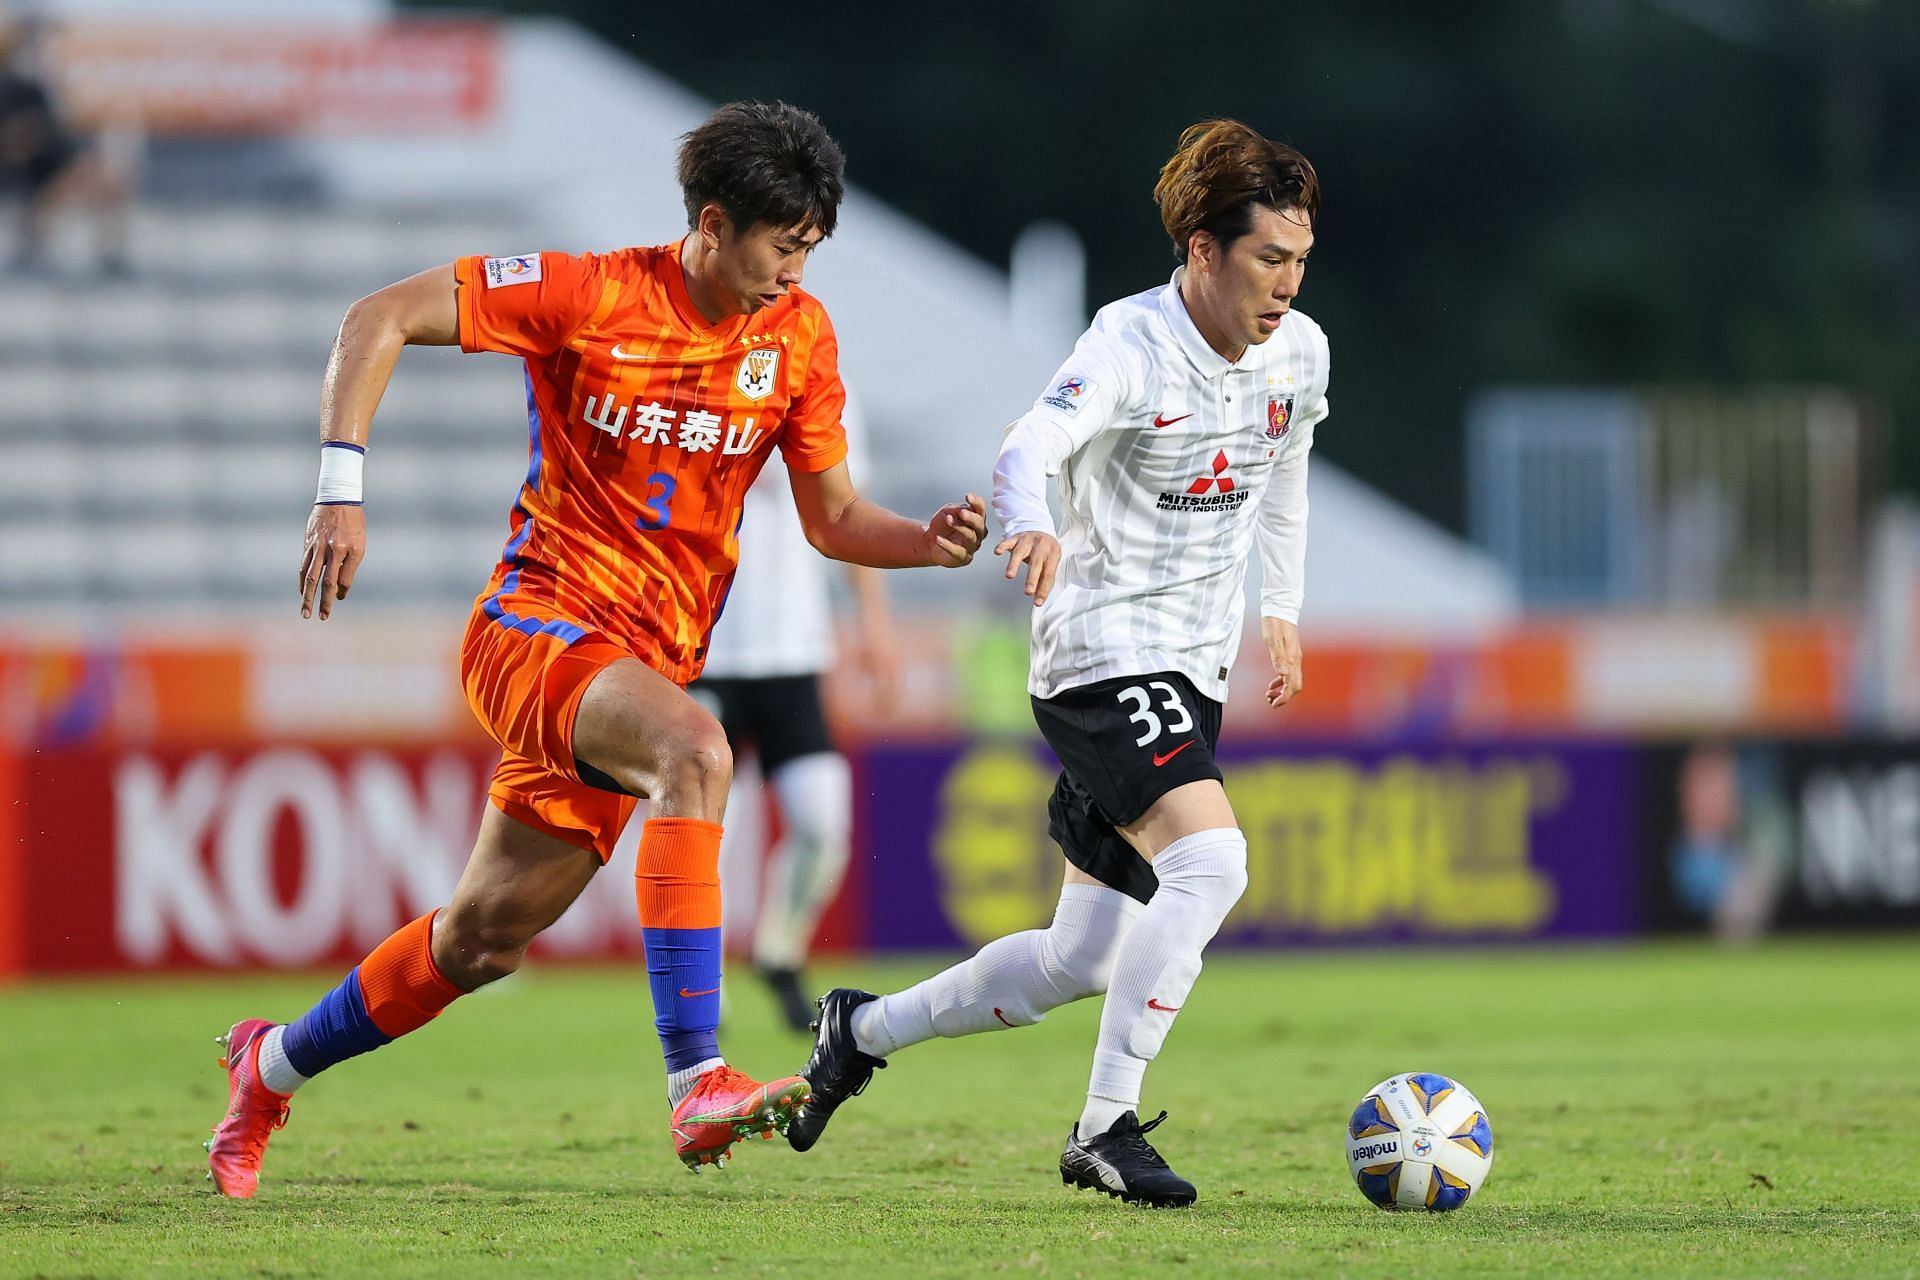 Shandong Taishan face Dalian Pro in their upcoming Chinese Super League fixture on Sunday